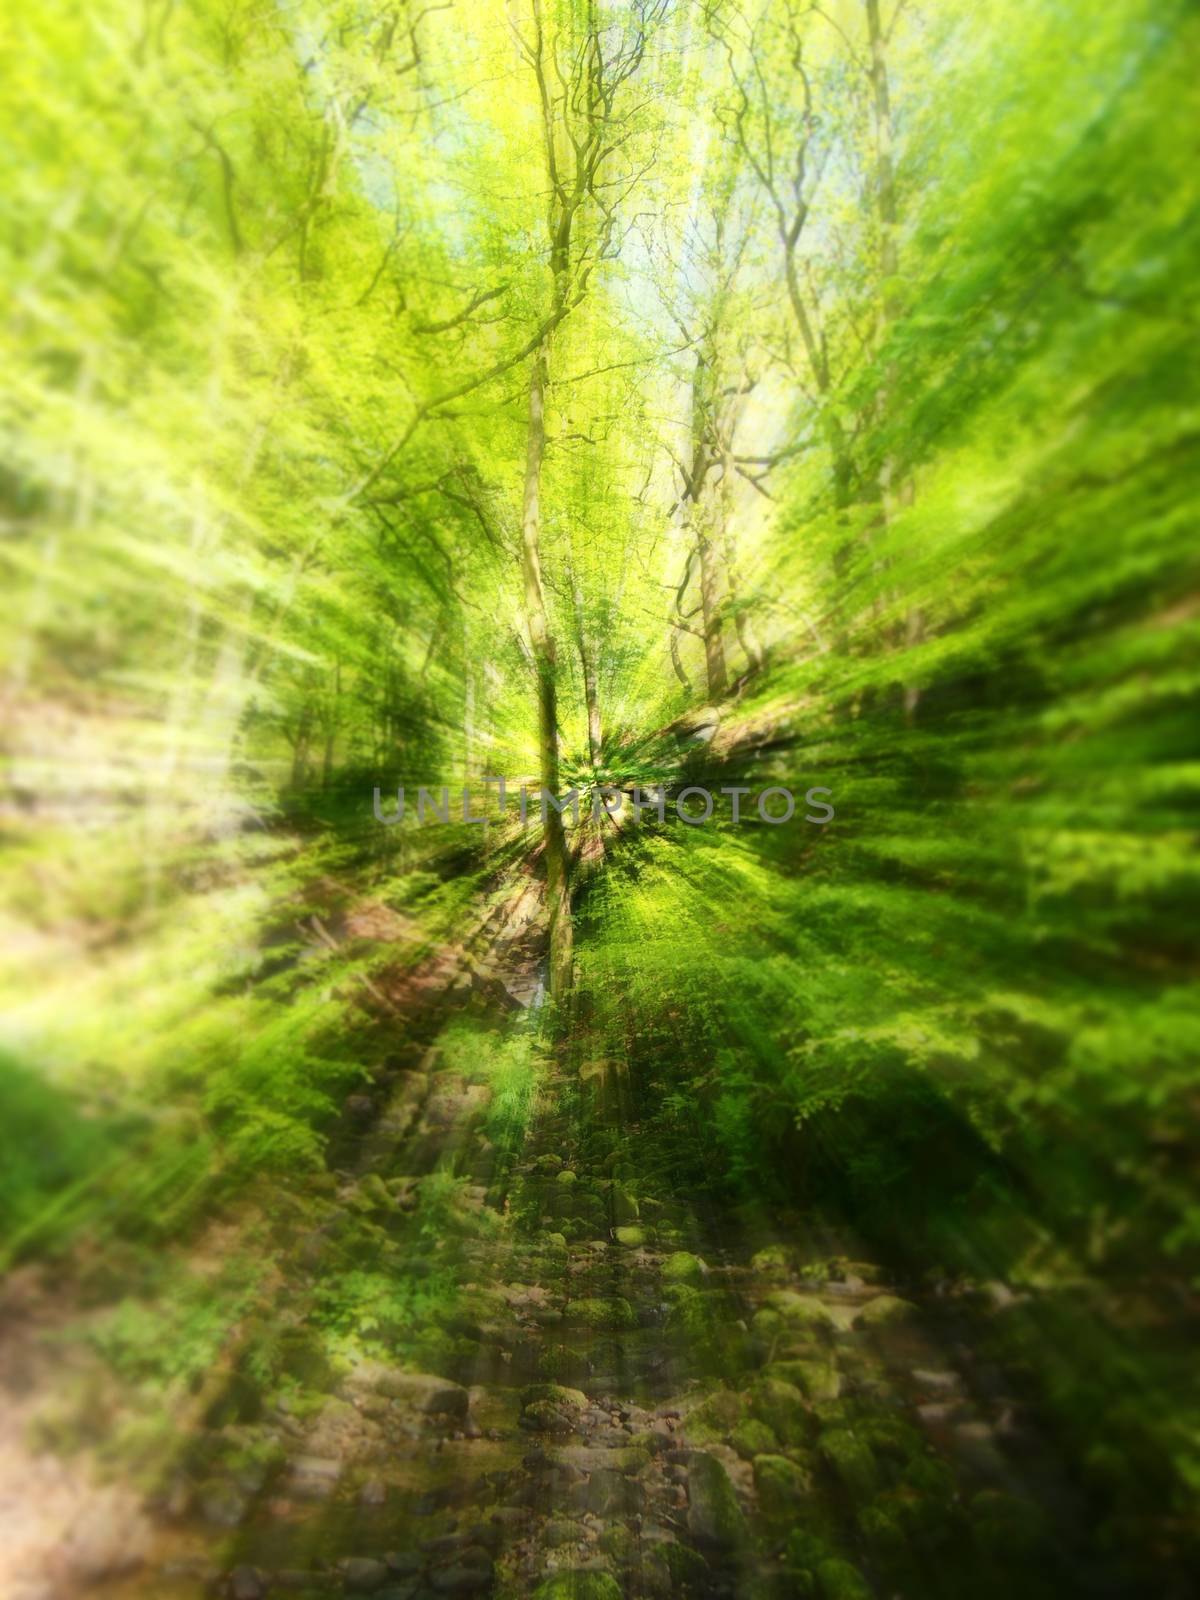 vibrant spring green abstract zoom blur of woodland trees and leaves